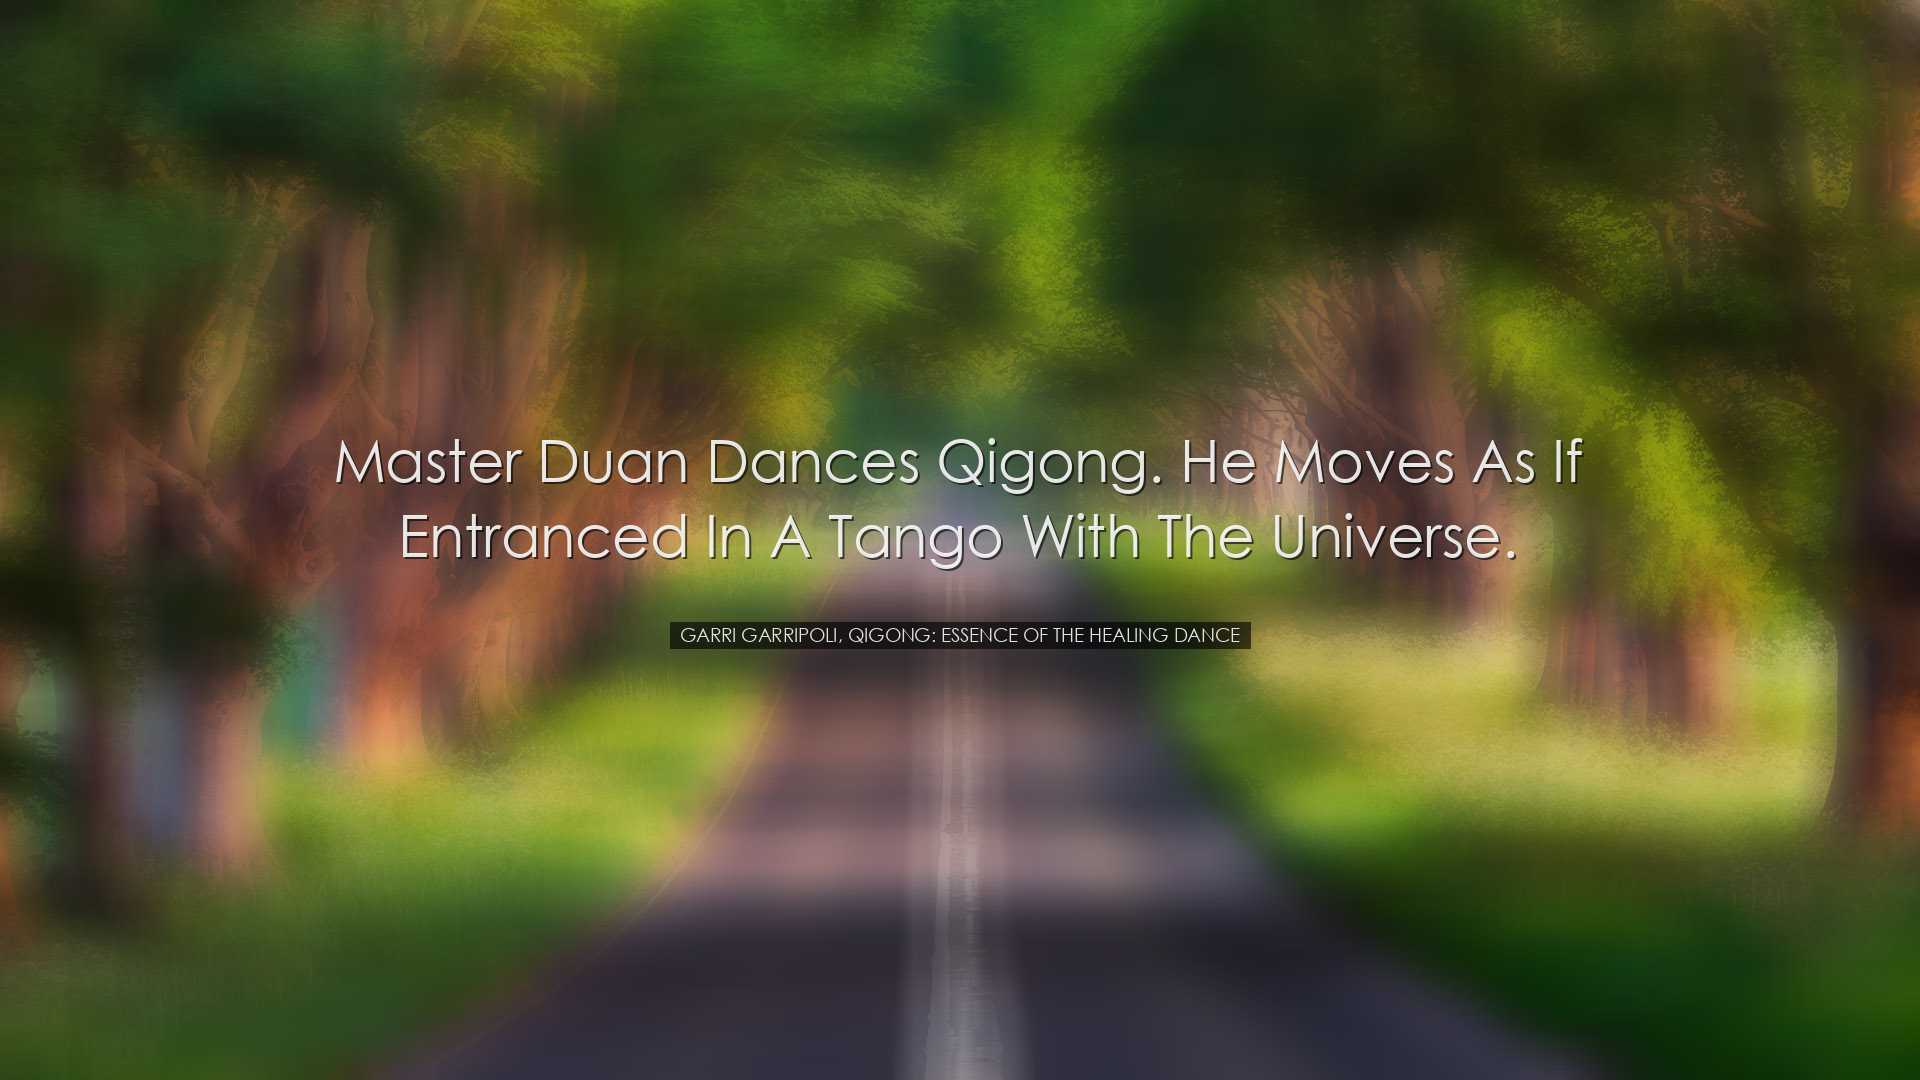 Master Duan dances Qigong. He moves as if entranced in a tango wit